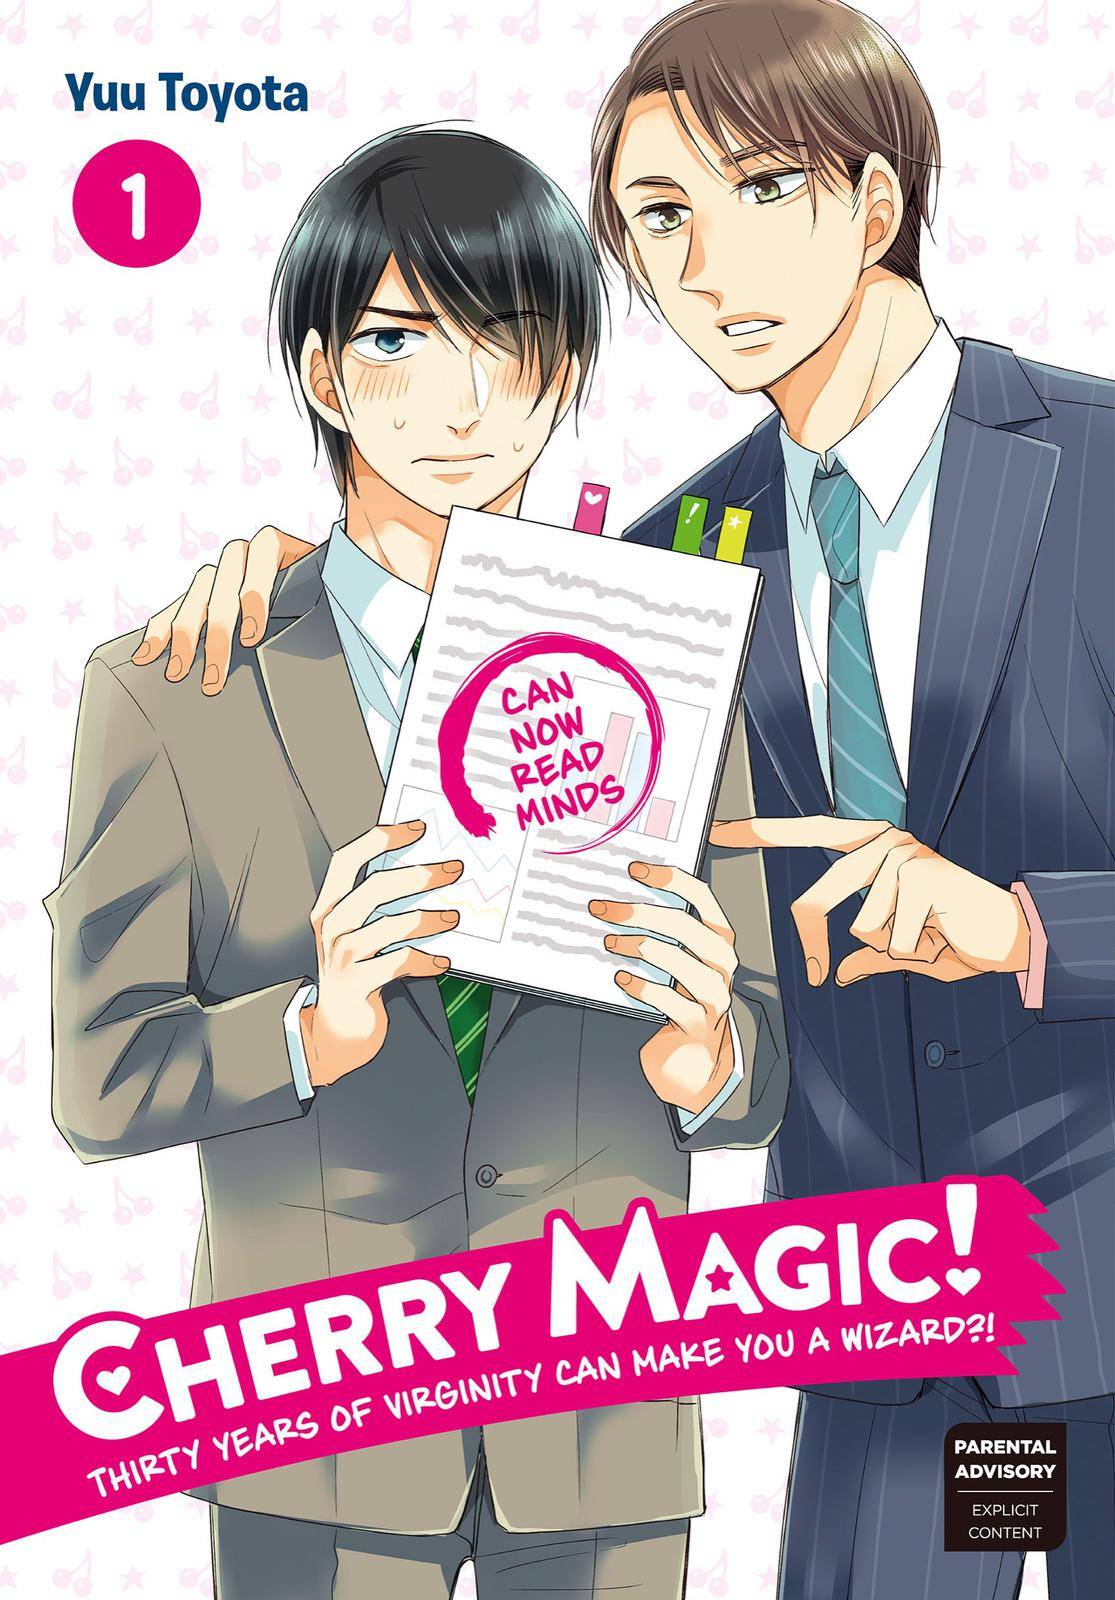 Cherry Magic! Thirty Years Of Virginity Can Make You A Wizard?! - chapter 1 - #1